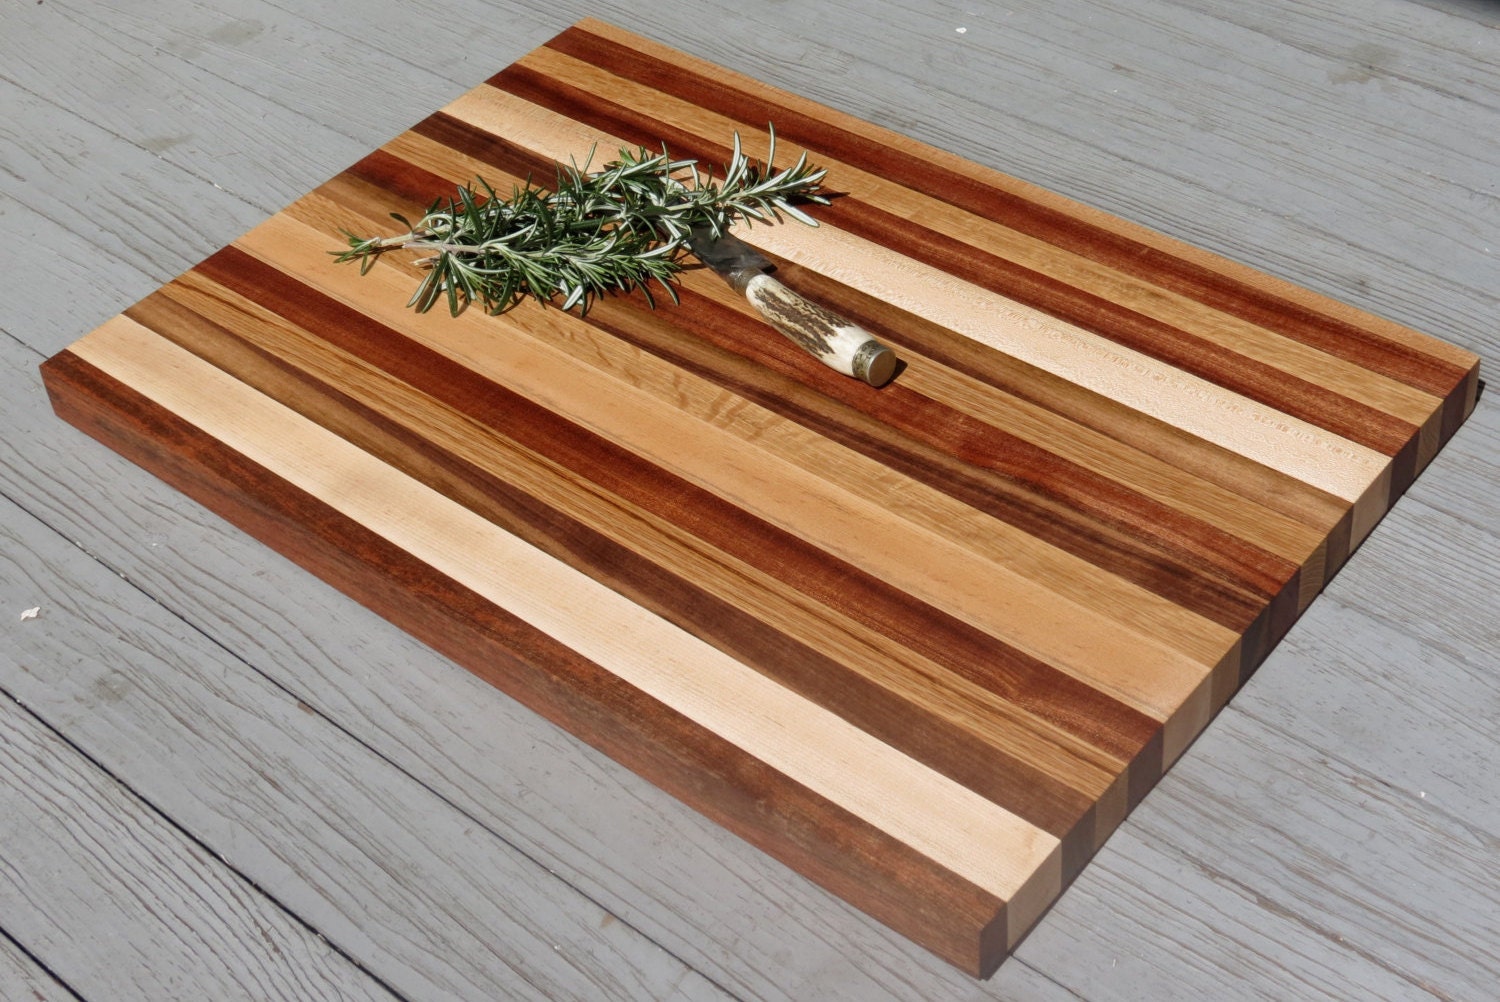 Chopping boards: How to choose